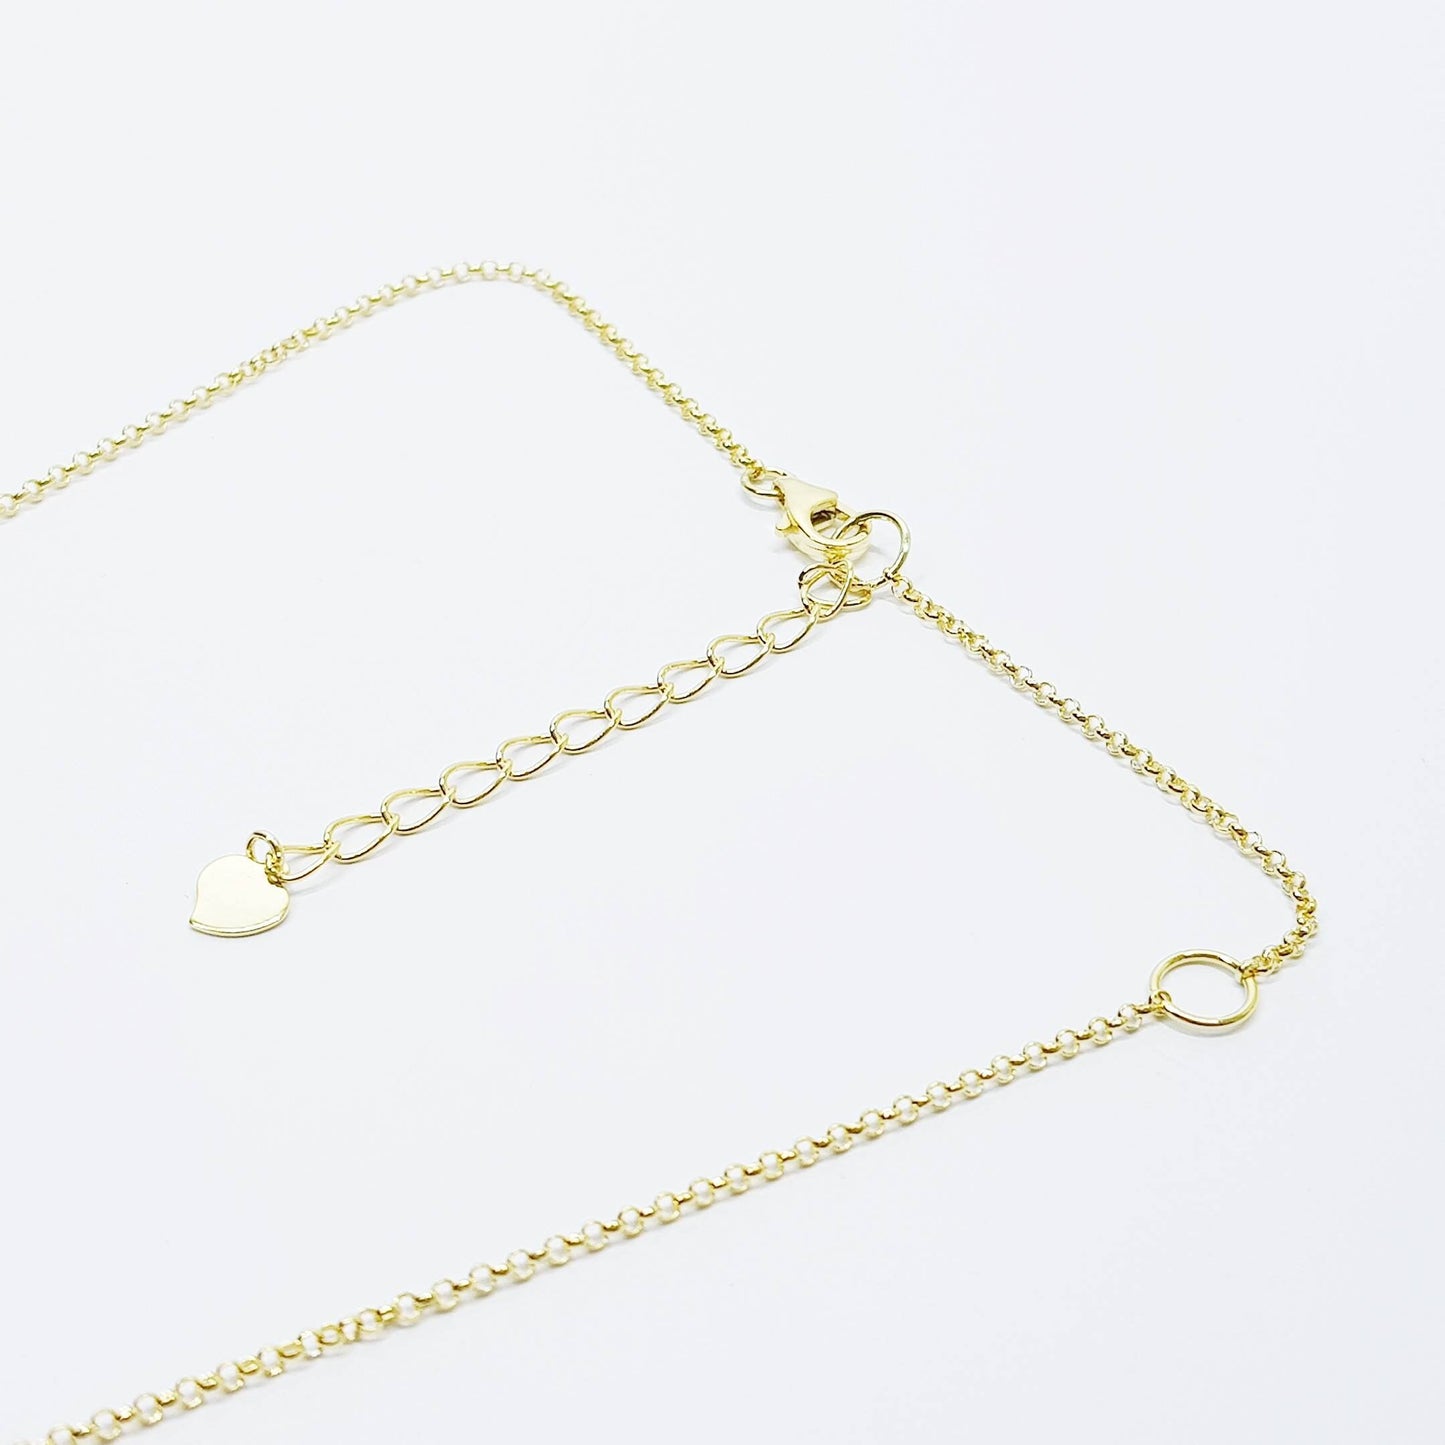 Modern heart necklace with yellow gold vermeil, sparkling faux diamond heart necklace